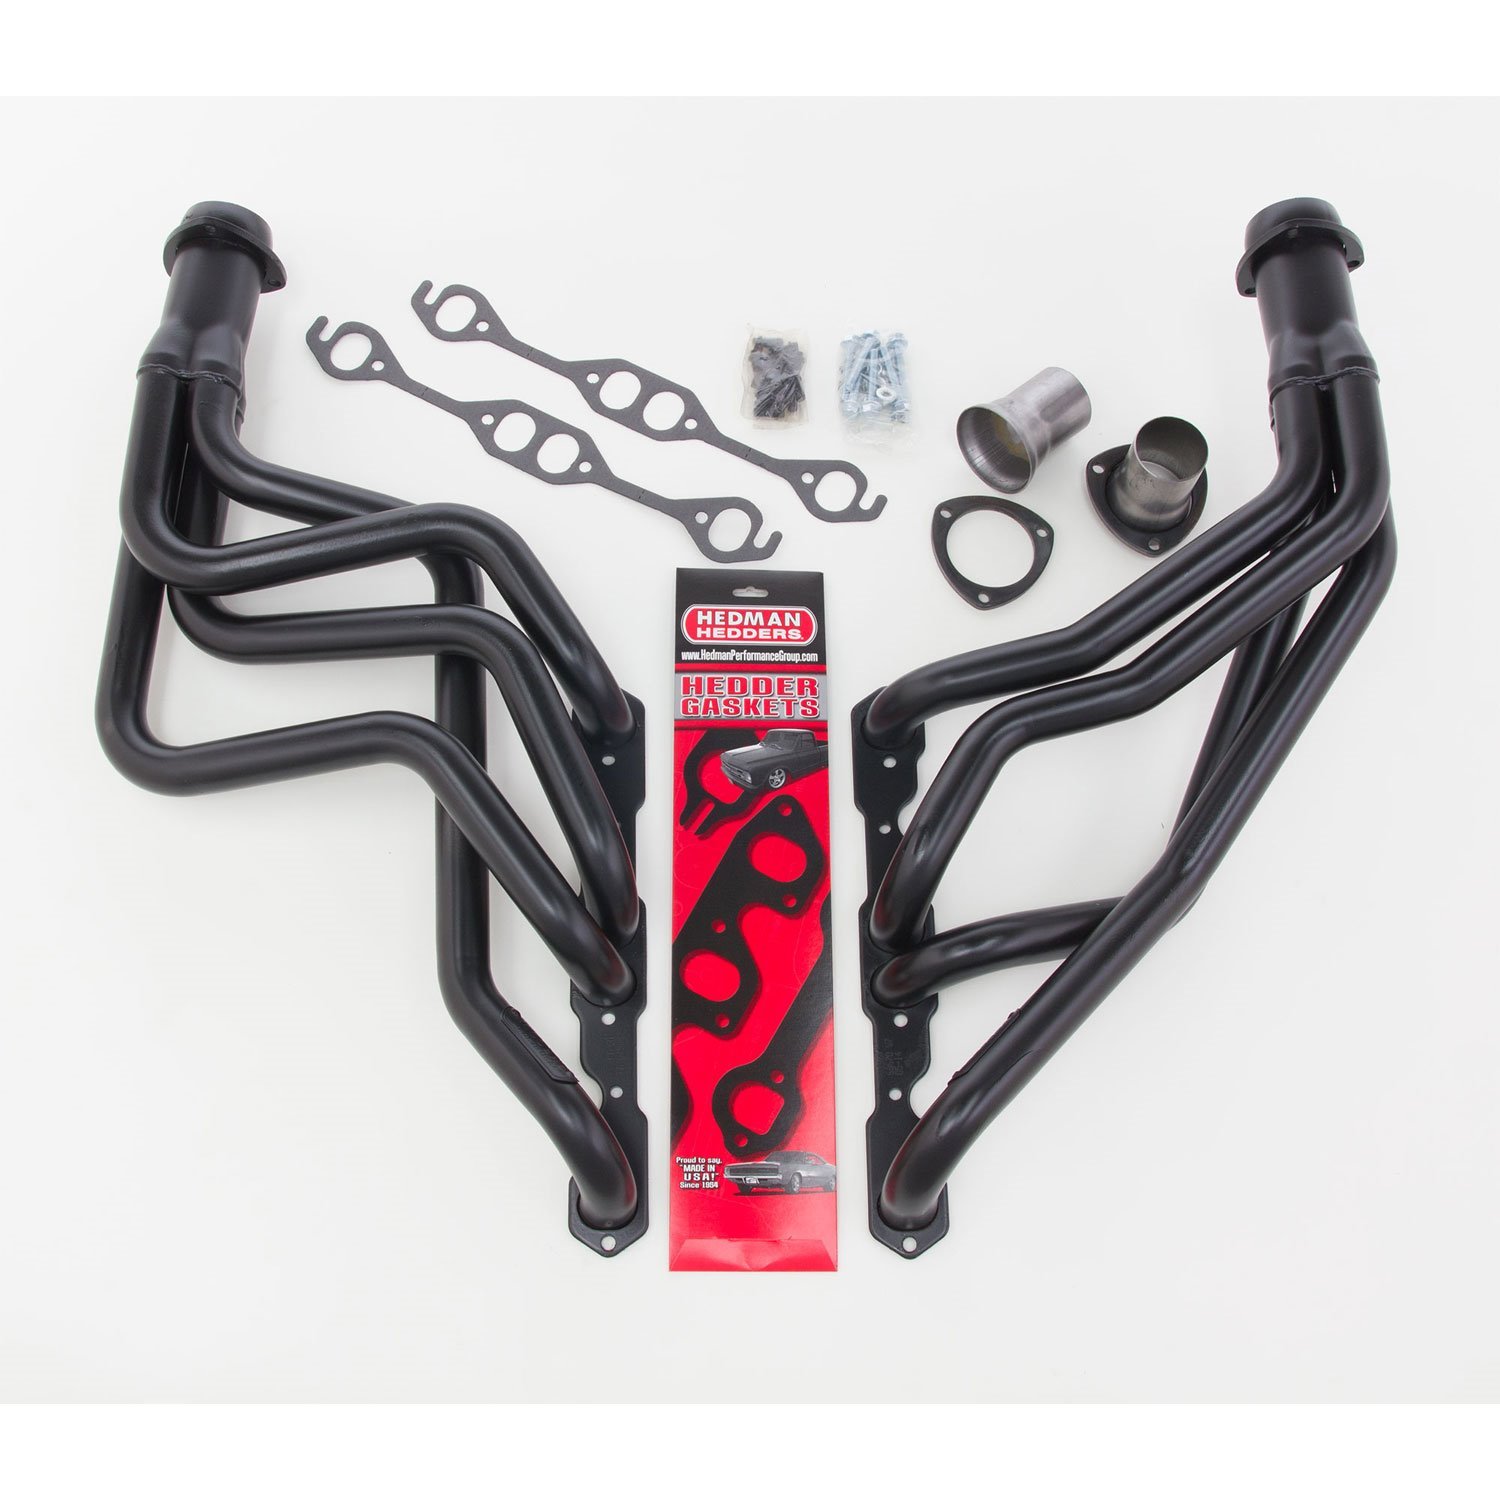 Standard Duty Uncoated Headers for 1967-81 Camaro ("Close Ratio" steering box)